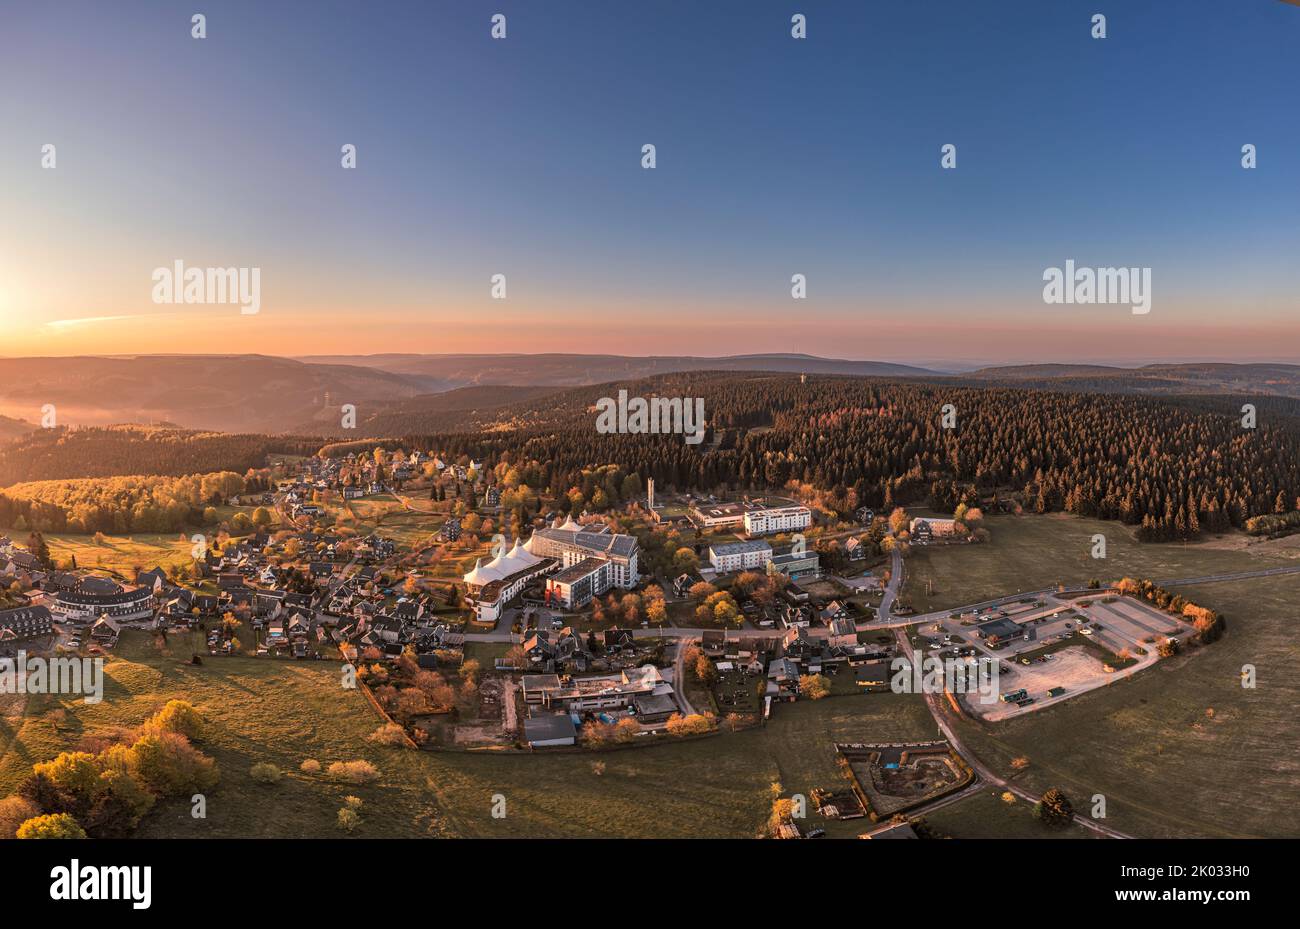 Germany, Thuringia, Masserberg, Rennsteig, village, Regiomed rehab clinic, mountains, forest, overview, aerial view Stock Photo